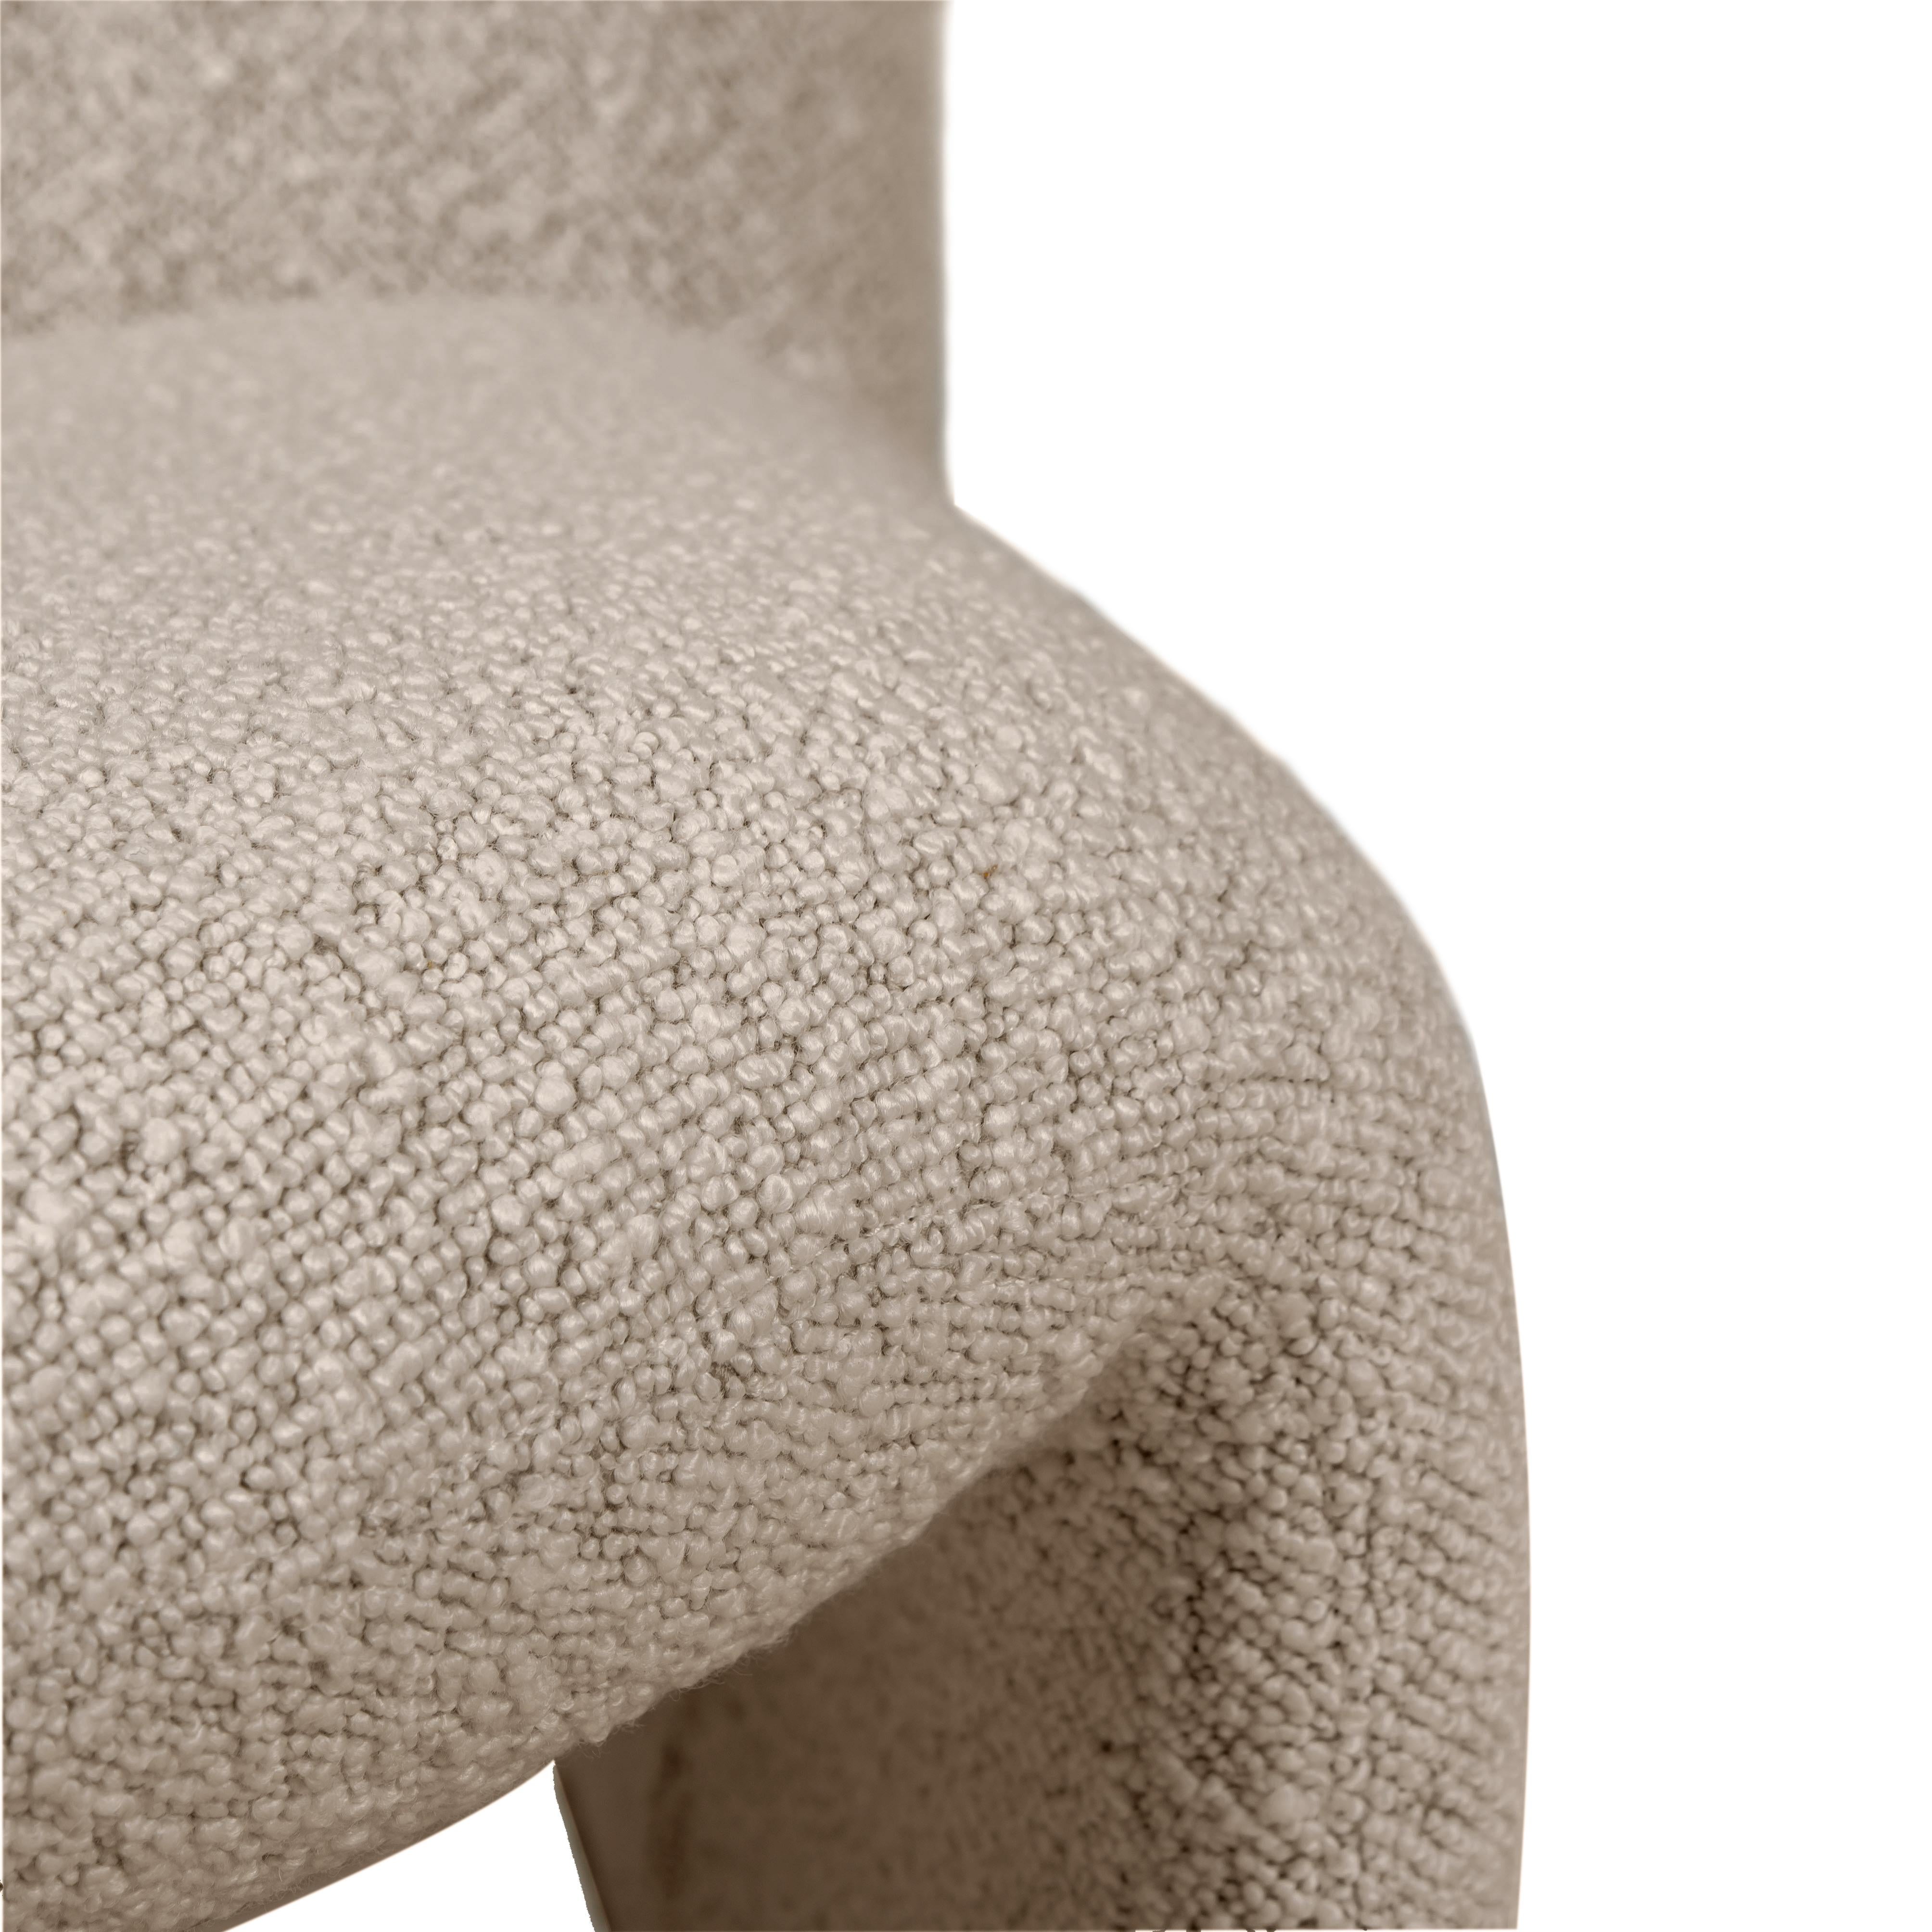 Italian One 'Alky' Chair by G. Piretti for Castelli New Upholstery Boucle by Dedar